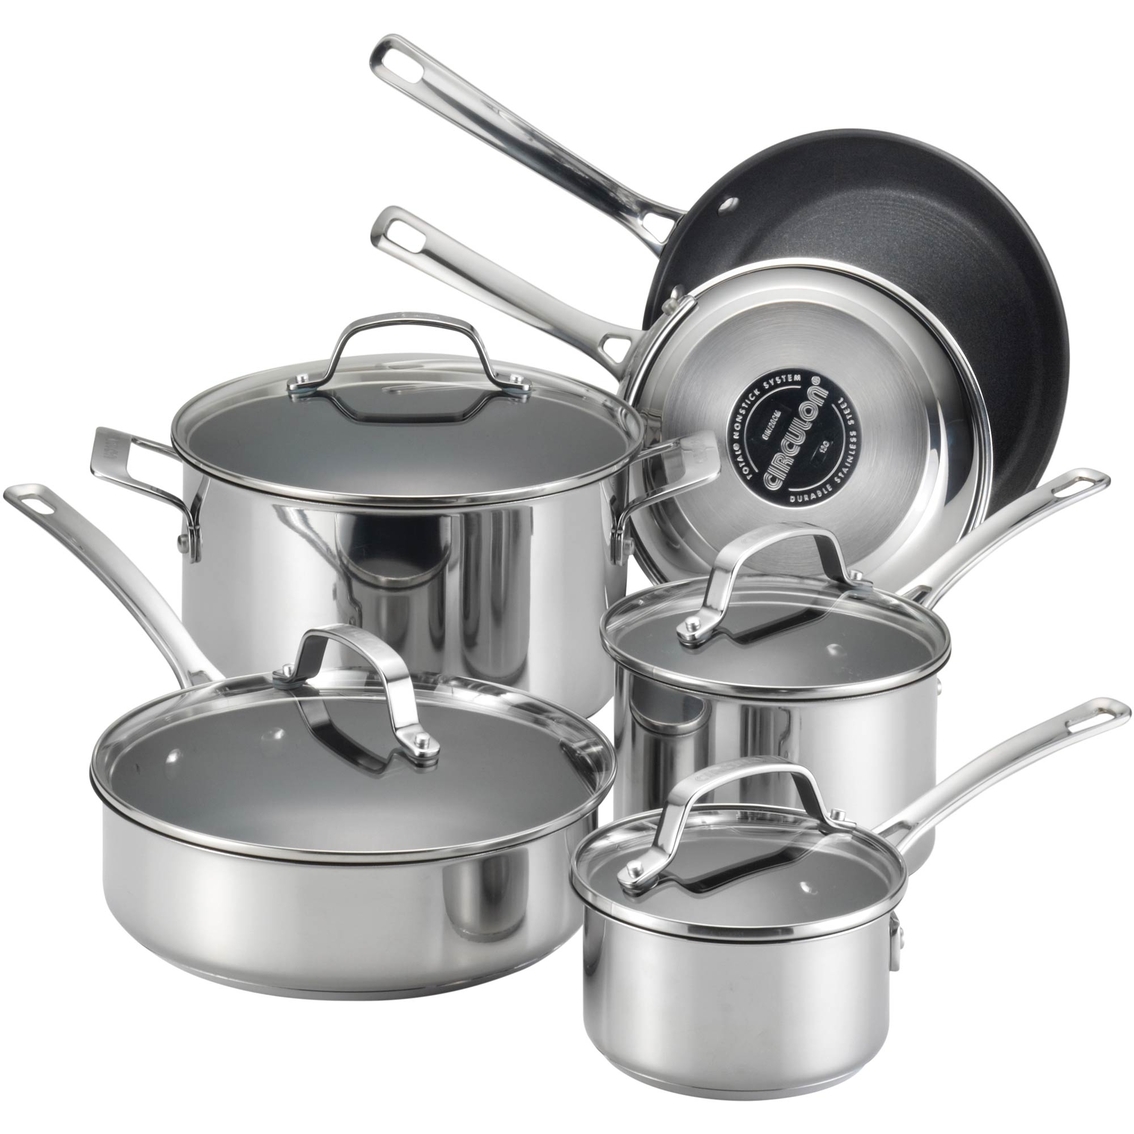 Circulon Genesis Stainless Steel 10 Pc. Nonstick Cookware Set, Stainless  Steel, Household